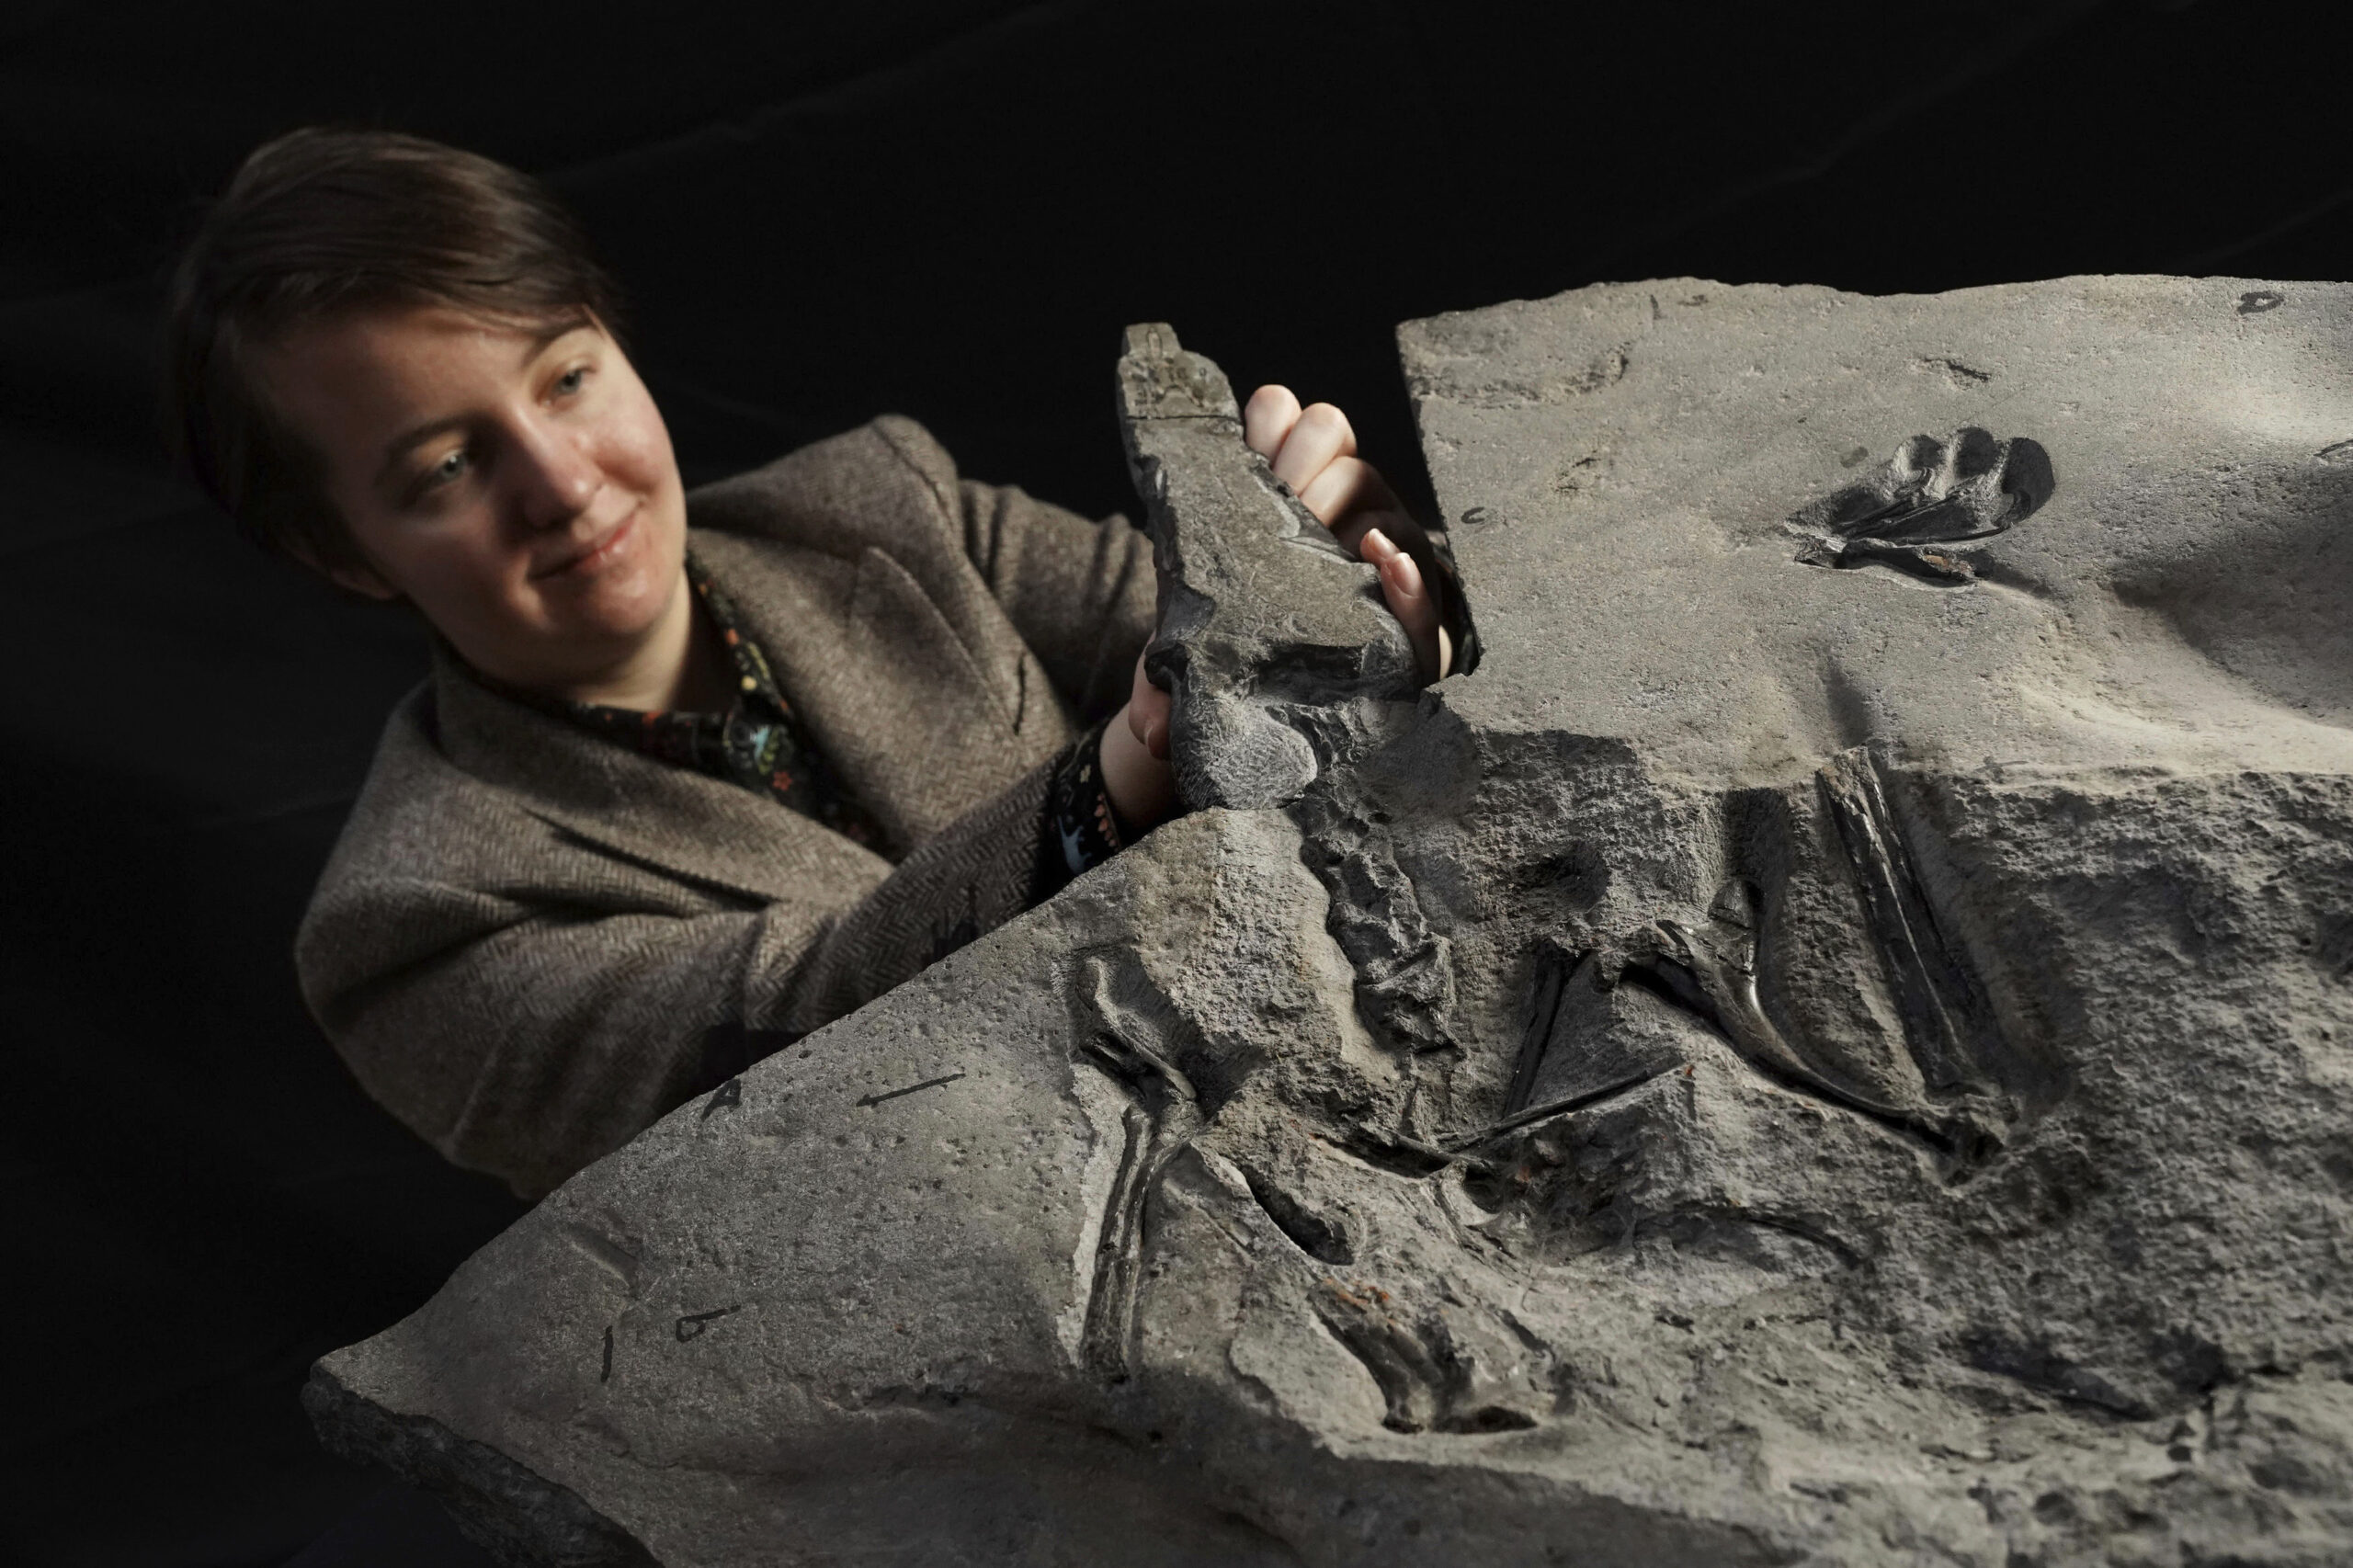 In this undated photo issued by the National Museums Scotland on Tuesday, Feb. 22, 2022, University of Edinburgh PhD student Natalia Jagielska poses for a photo with the world's largest Jurassic pterosaur unearthed on the Isle of Skye. The fossil of a 170-million-year-old pterosaur, more popularly known as pterodactyl, billed as the world’s best-preserved skeleton of the prehistoric winged reptile, has been found on the Isle of Skye in remote Scotland. The National Museum of Scotland said the fossil of the pterosaur is the largest of its kind ever discovered from the Jurassic period. (Stewart Attwood/National Museums Scotland via AP)